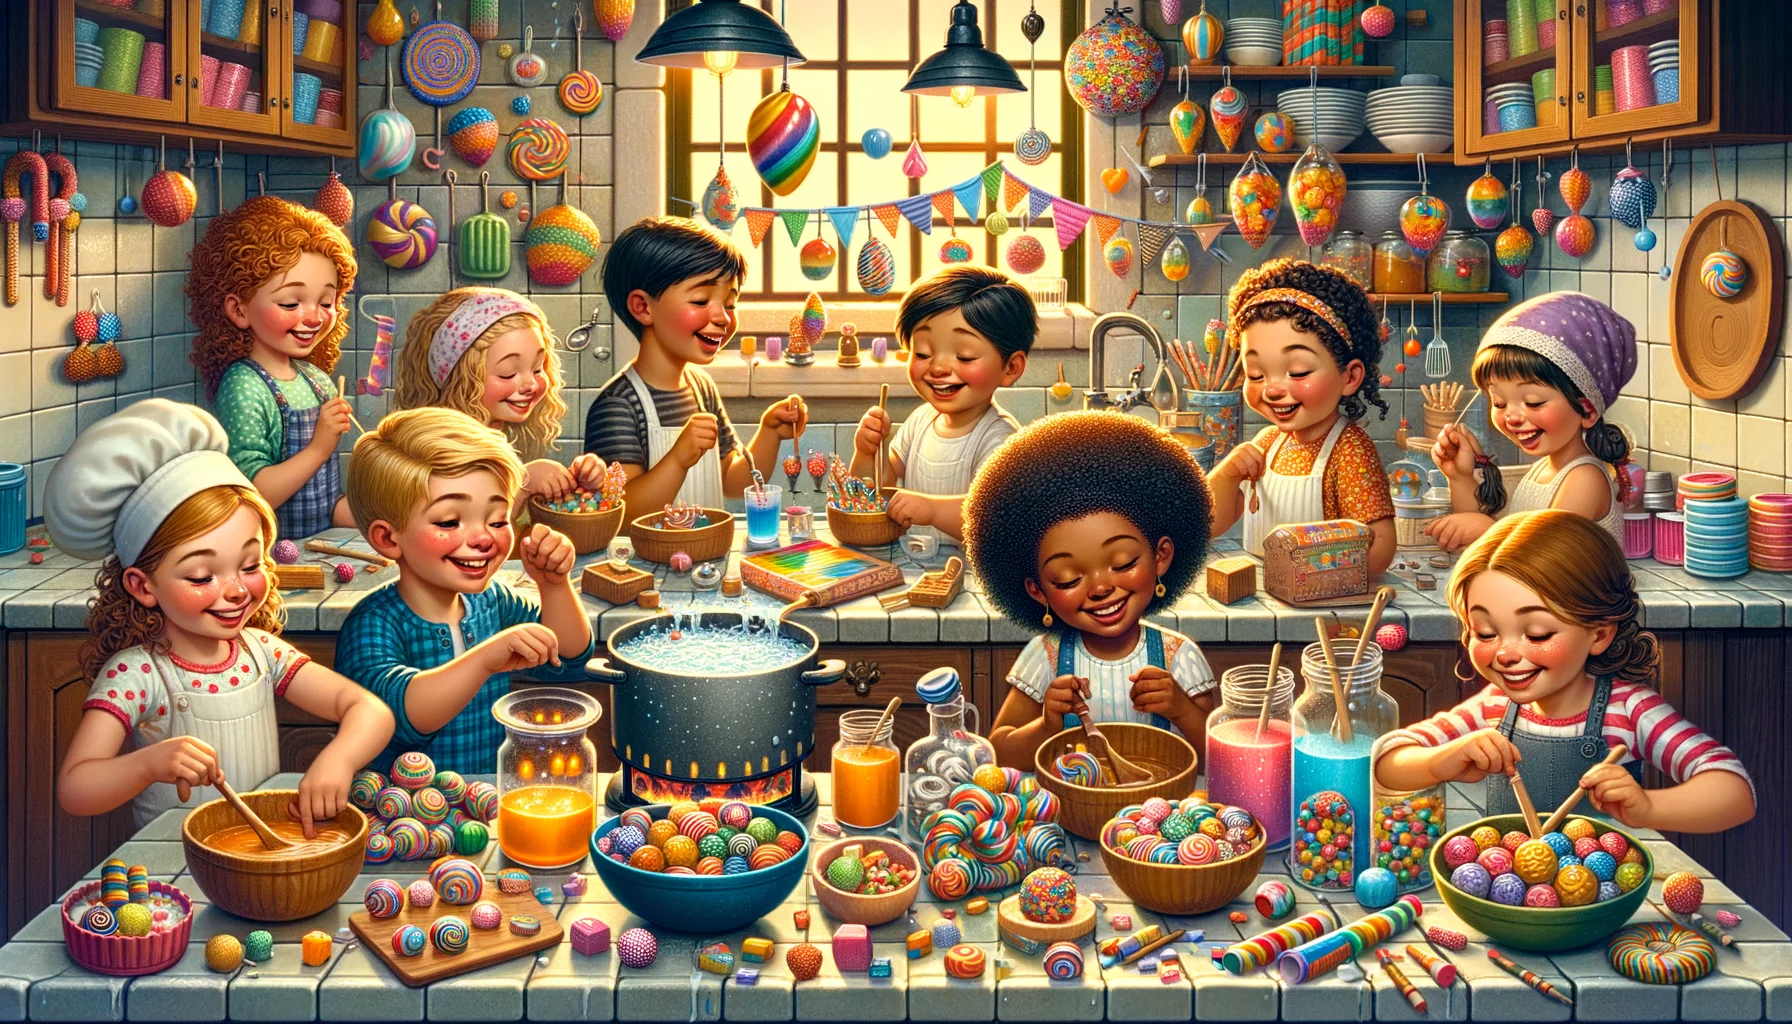 Create a whimsical, detailed, and realistic image encapsulating the joy of homemade candy-making for kids. Visualize a bustling kitchen setting filled with vibrant colors and the buzz of activity. Depict a group of children of diverse descents, including a Caucasian boy, a Black girl, an Hispanic boy and a Middle-Eastern girl, engrossed in crafting candies. Include elements like colorful candy molds, a bubbling pot of sugar syrup, a rainbow of candy wrappers, and various candy-making apparatus. The children should be giggling, grinning, and gently jostling each other, clearly enjoying the process. The scene should radiate warmth, camaraderie, and the sweet chaos of teamwork, capturing the ideal 'Homemade Candy Kits for Kids' experience.